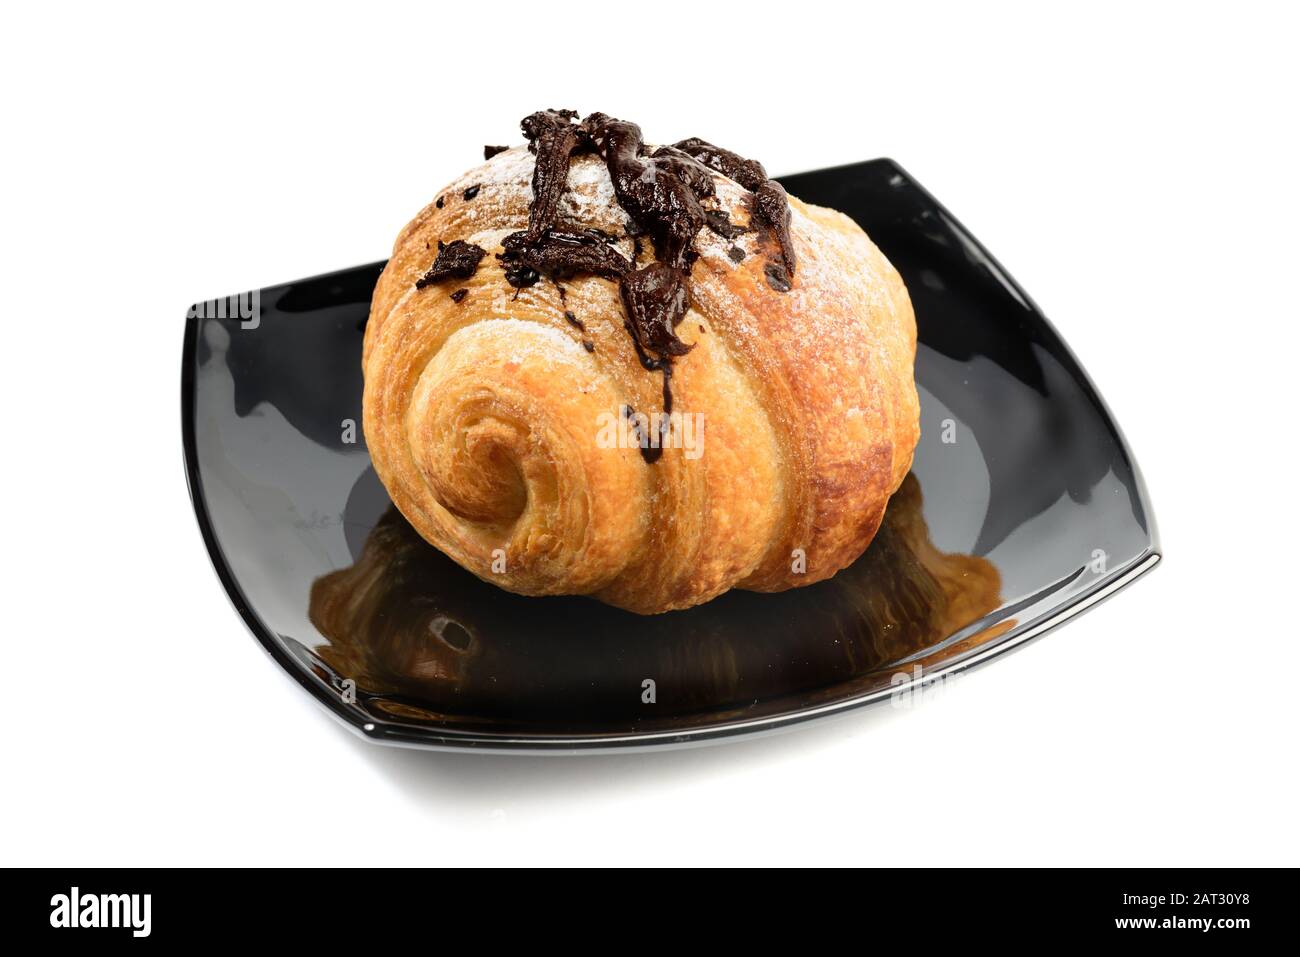 French croissant with chocolate on black plate isolated on white background Stock Photo